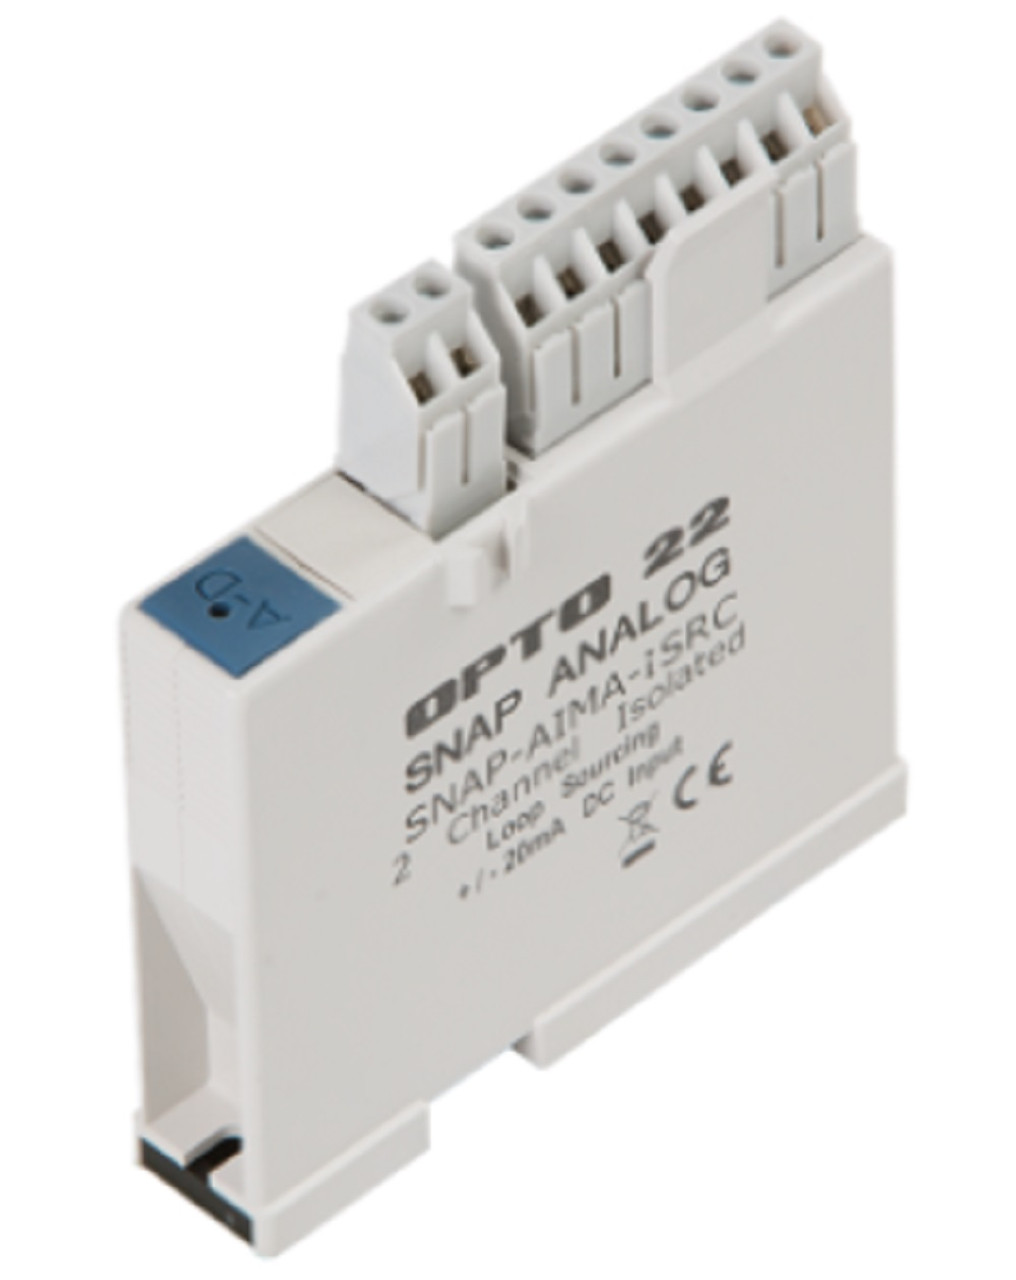 Opto 22 SNAP-AIMA-iSRC SNAP 2-Ch Iso -20 to +20 mA Analog Current Input Module [Refurbished]